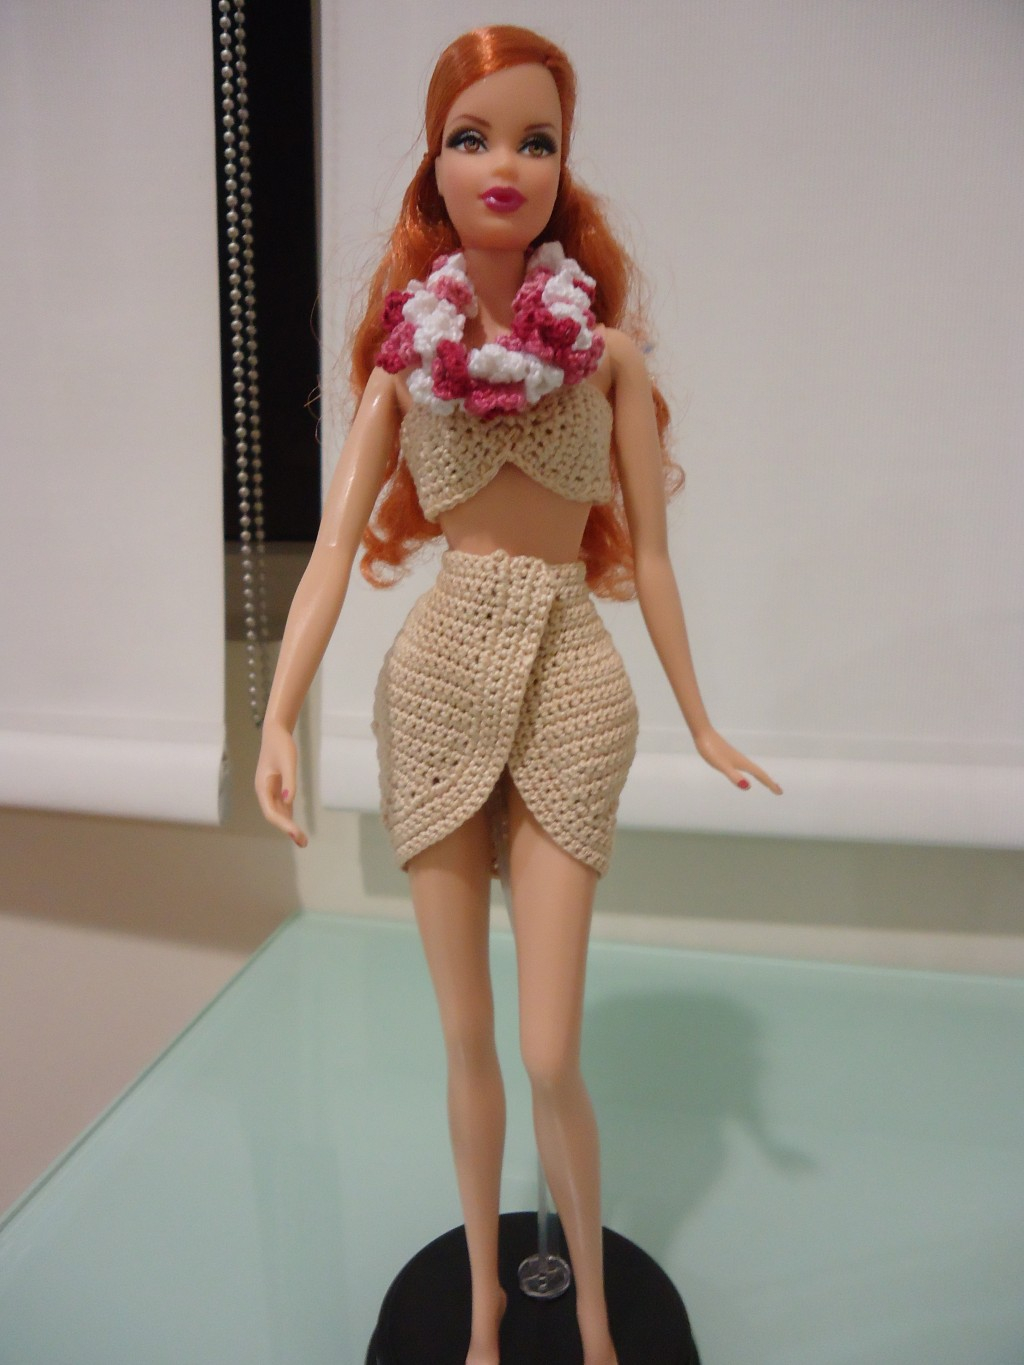 Crochet Doll Dress Patterns For Barbies Crochet Clothes For Your Barbie Doll Tips And Free Patterns